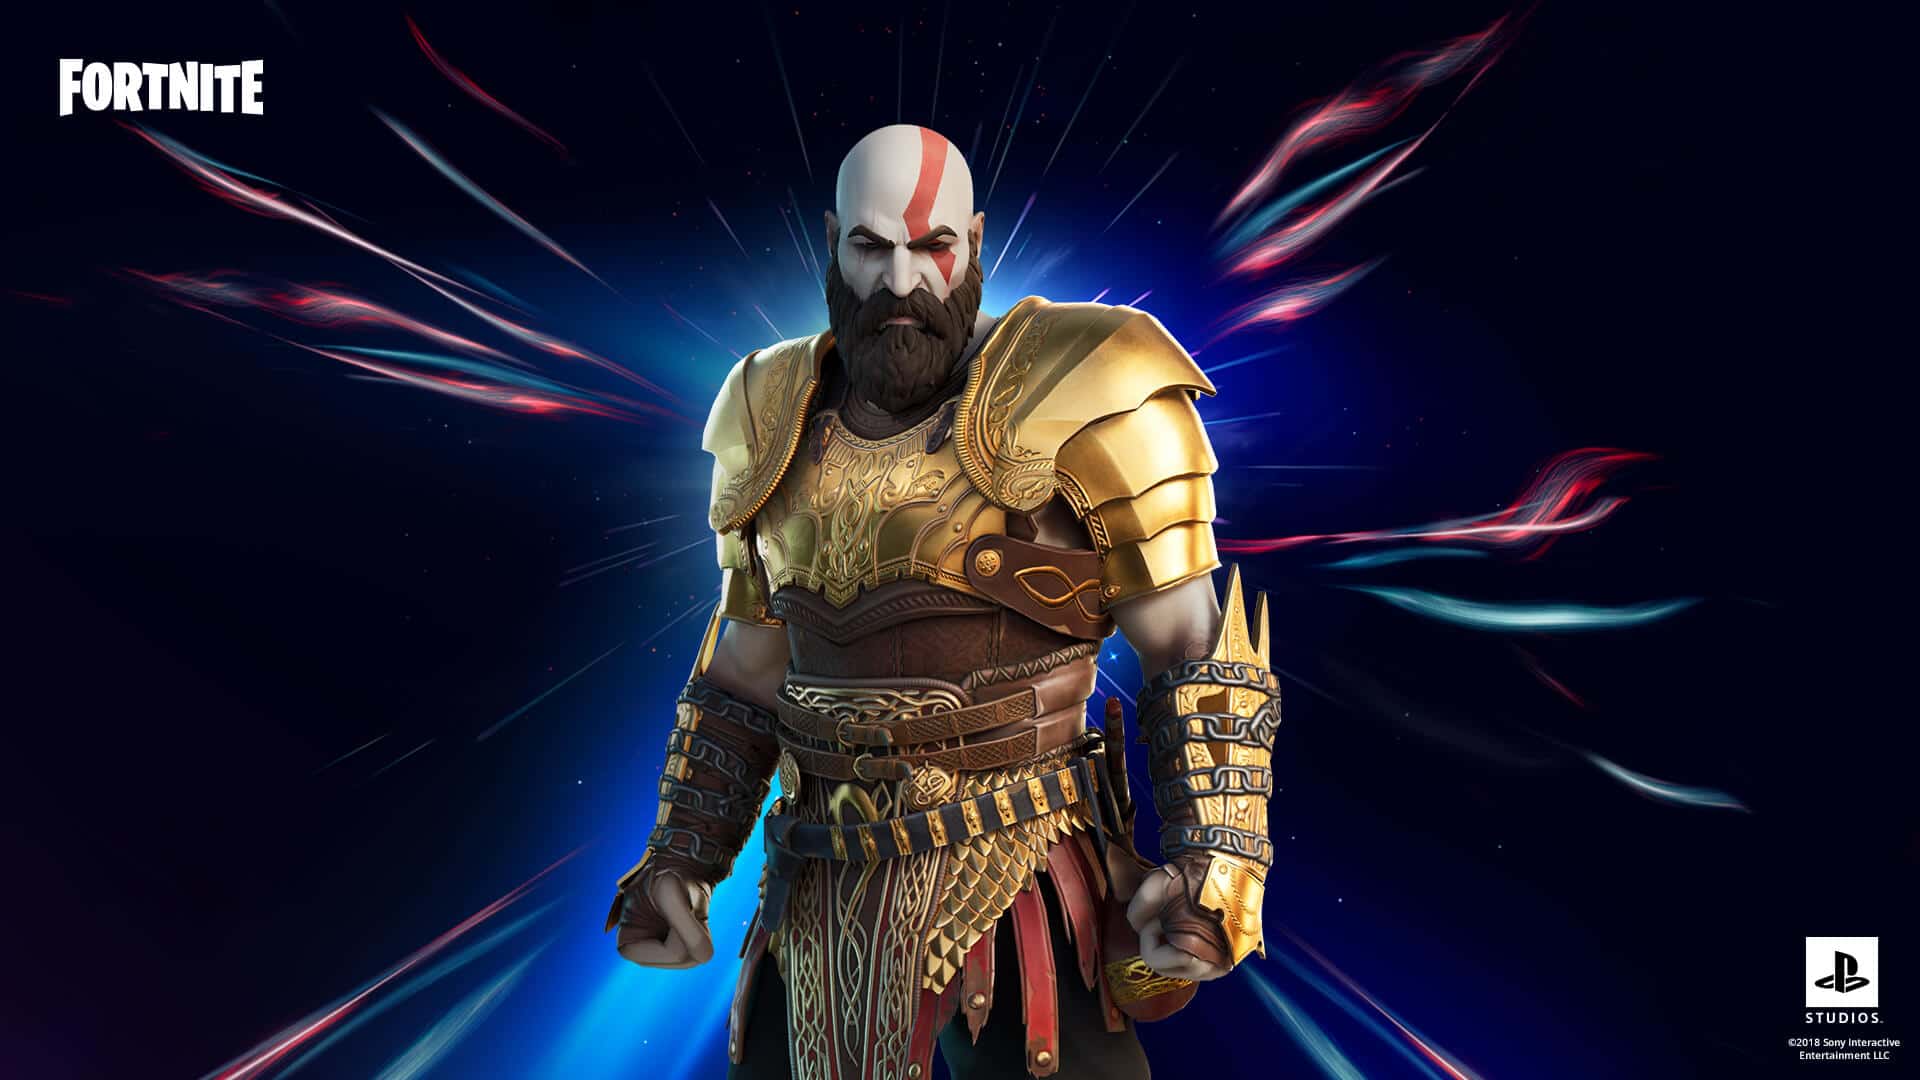 Is Kratos returning to Fortnite?